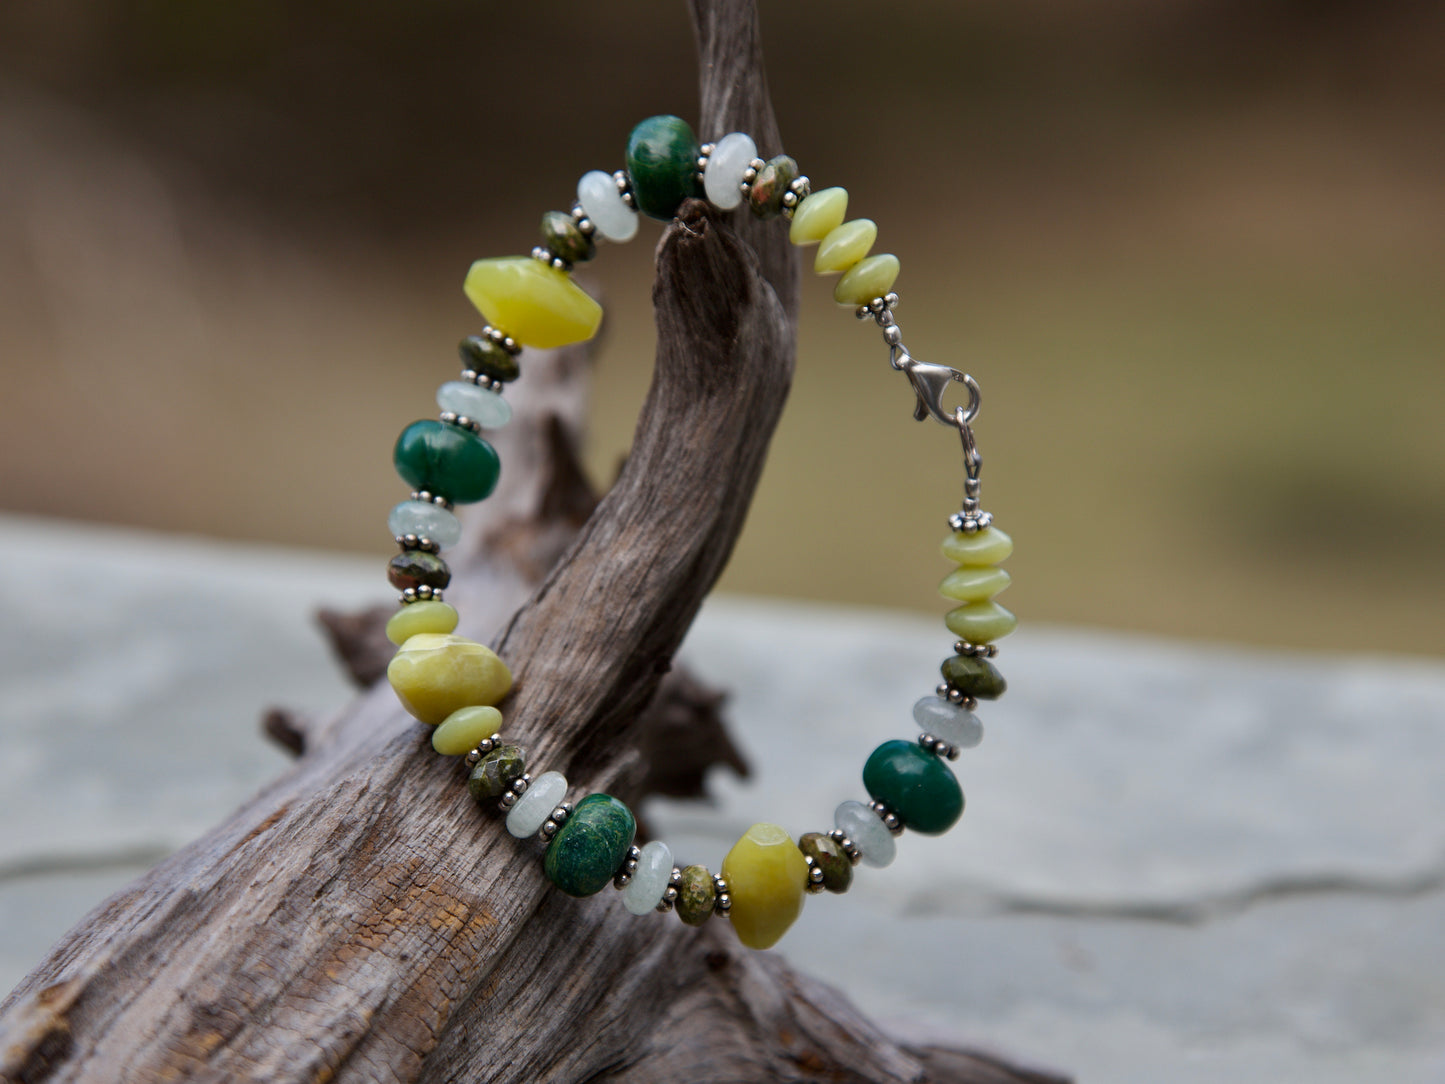 Shades of Green Stone and Sterling Silver Bracelet to fit a 7.75" wrist